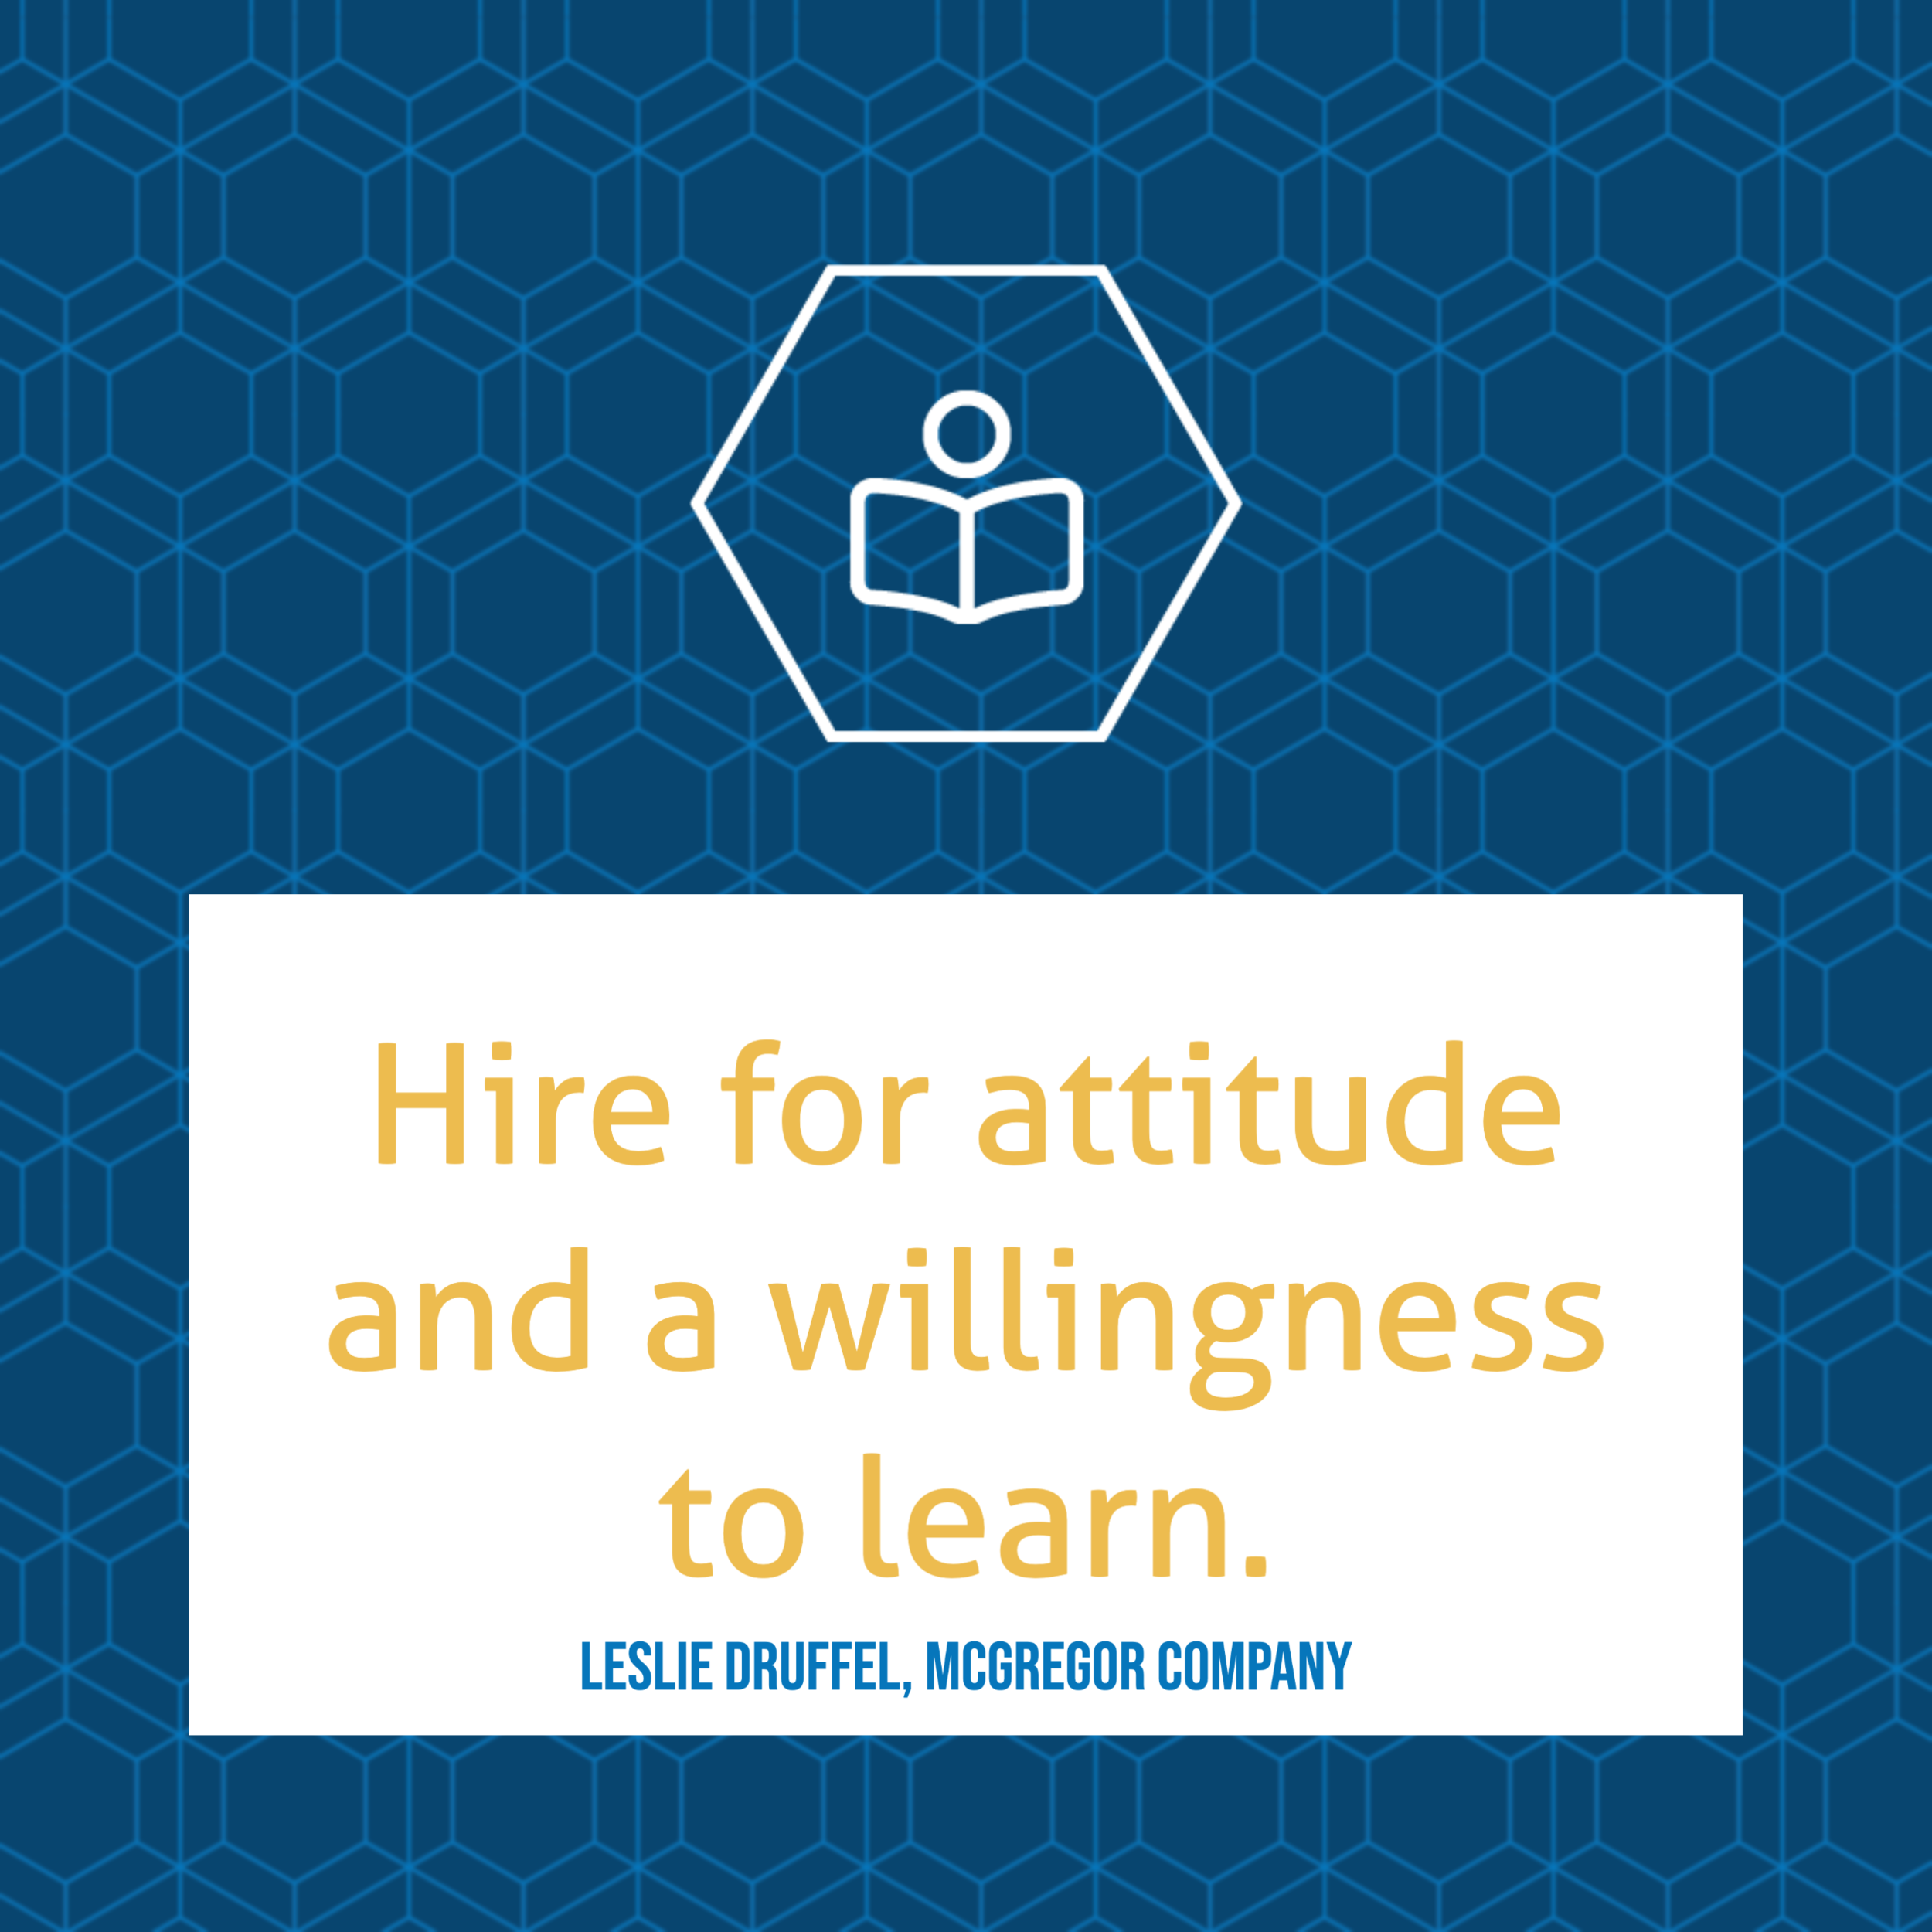 Hire for attitude and a willingness to learn. -Leslie Druffel, McGregor Company